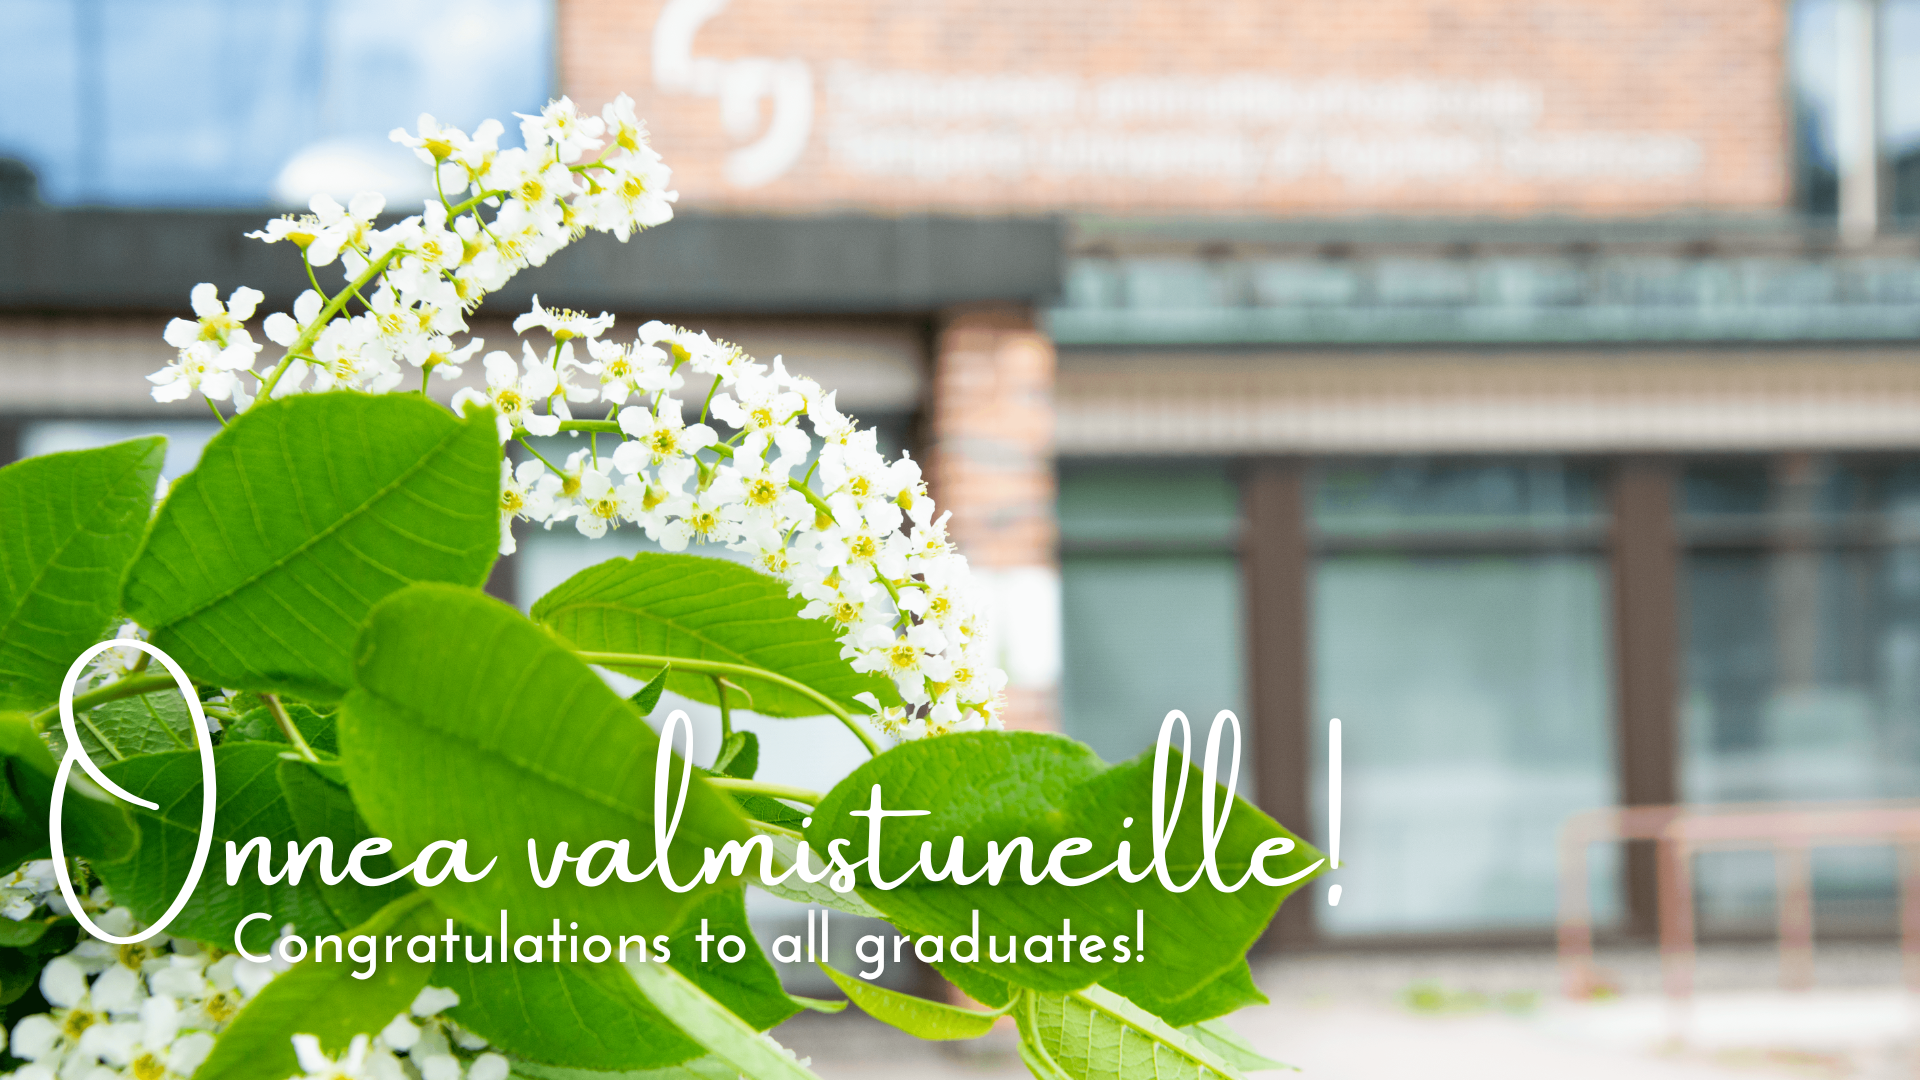 Congratulations to all graduates of the spring!